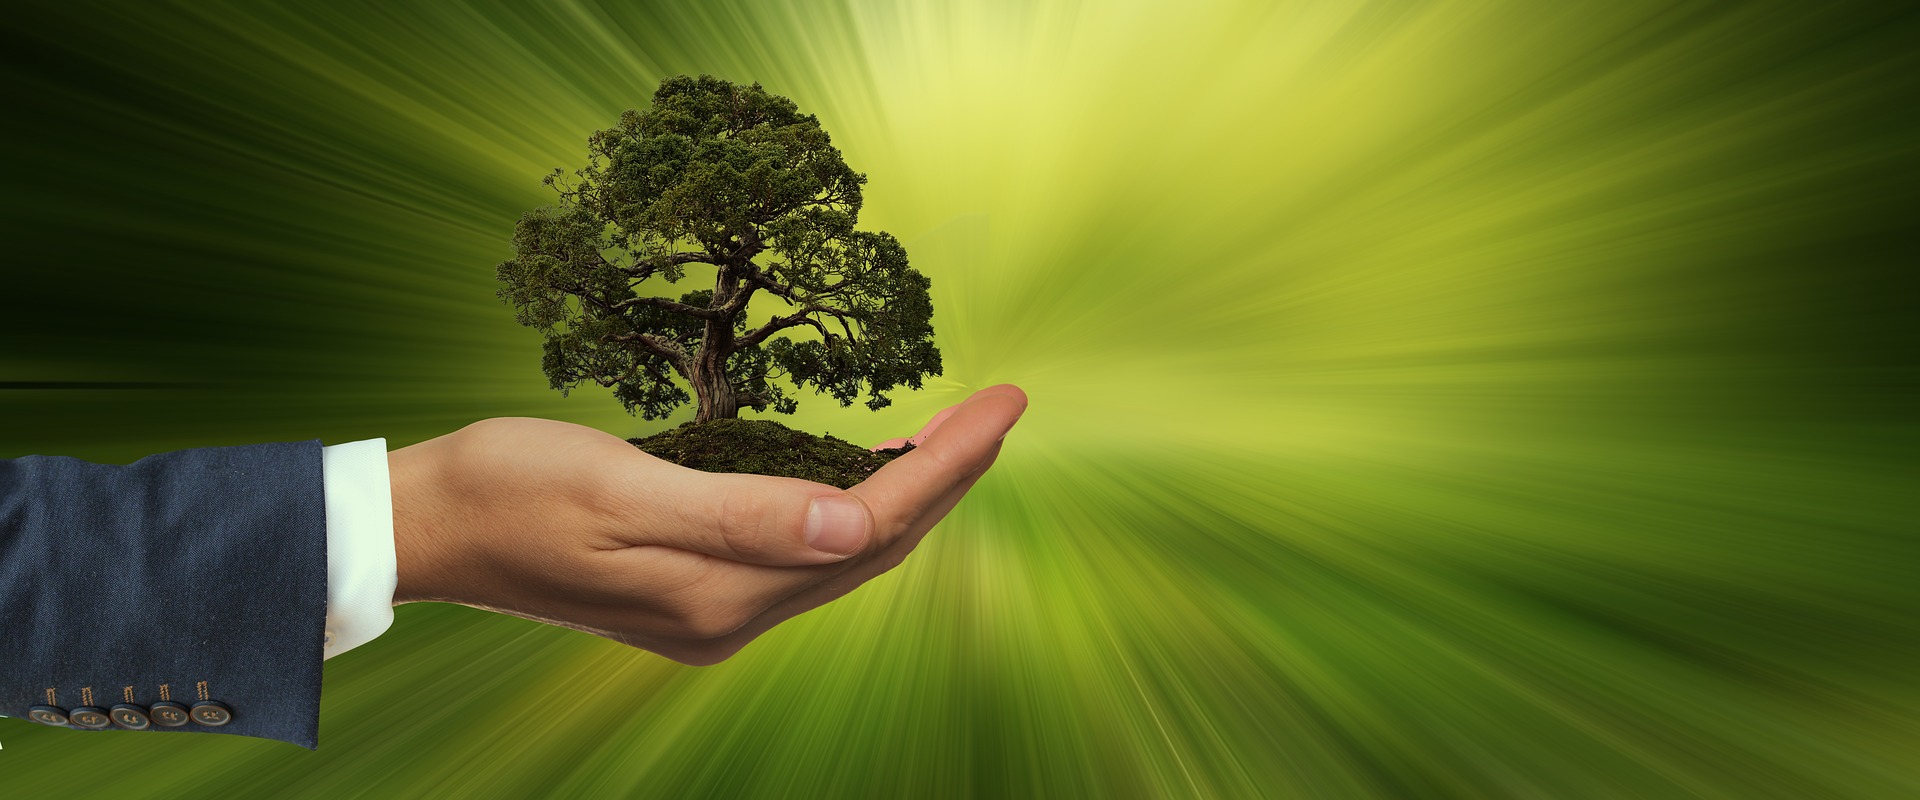 Mans hand in business dress holding a tree in his palm on a green background